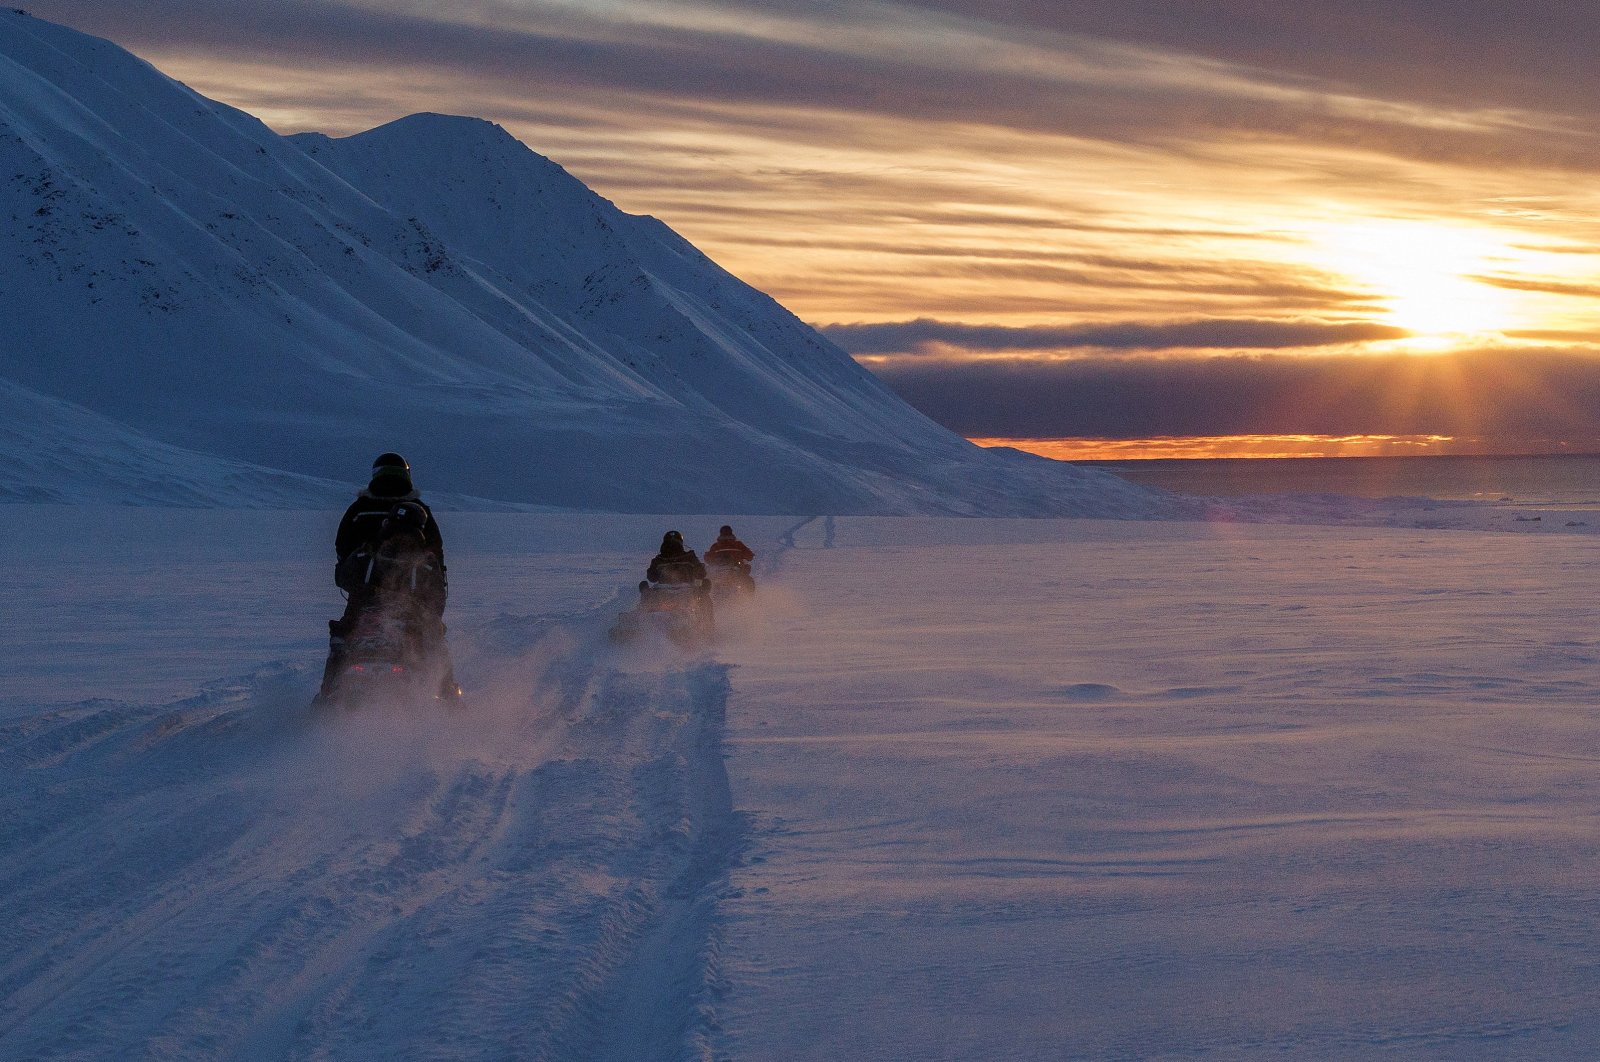 Scientists drive their snowmobiles across the Arctic toward Kongsfjord during sunset near Ny-Alesund, Svalbard, Norway, April 10, 2023. (Reuters Photo)